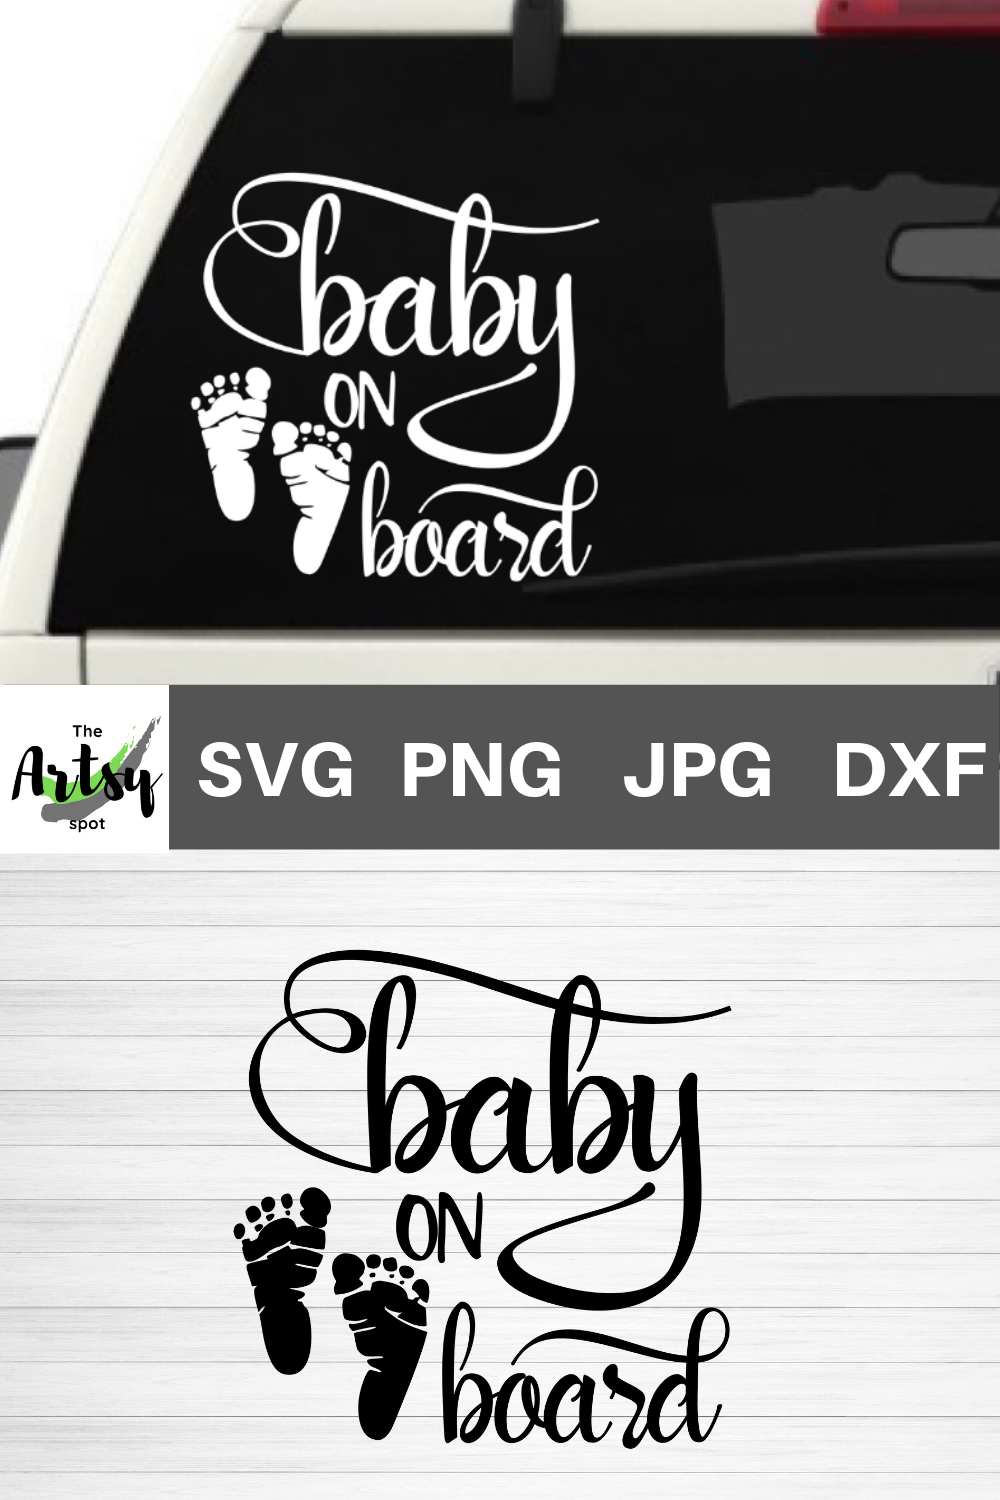 Download Baby on board baby footprints svg cut file, car window decal